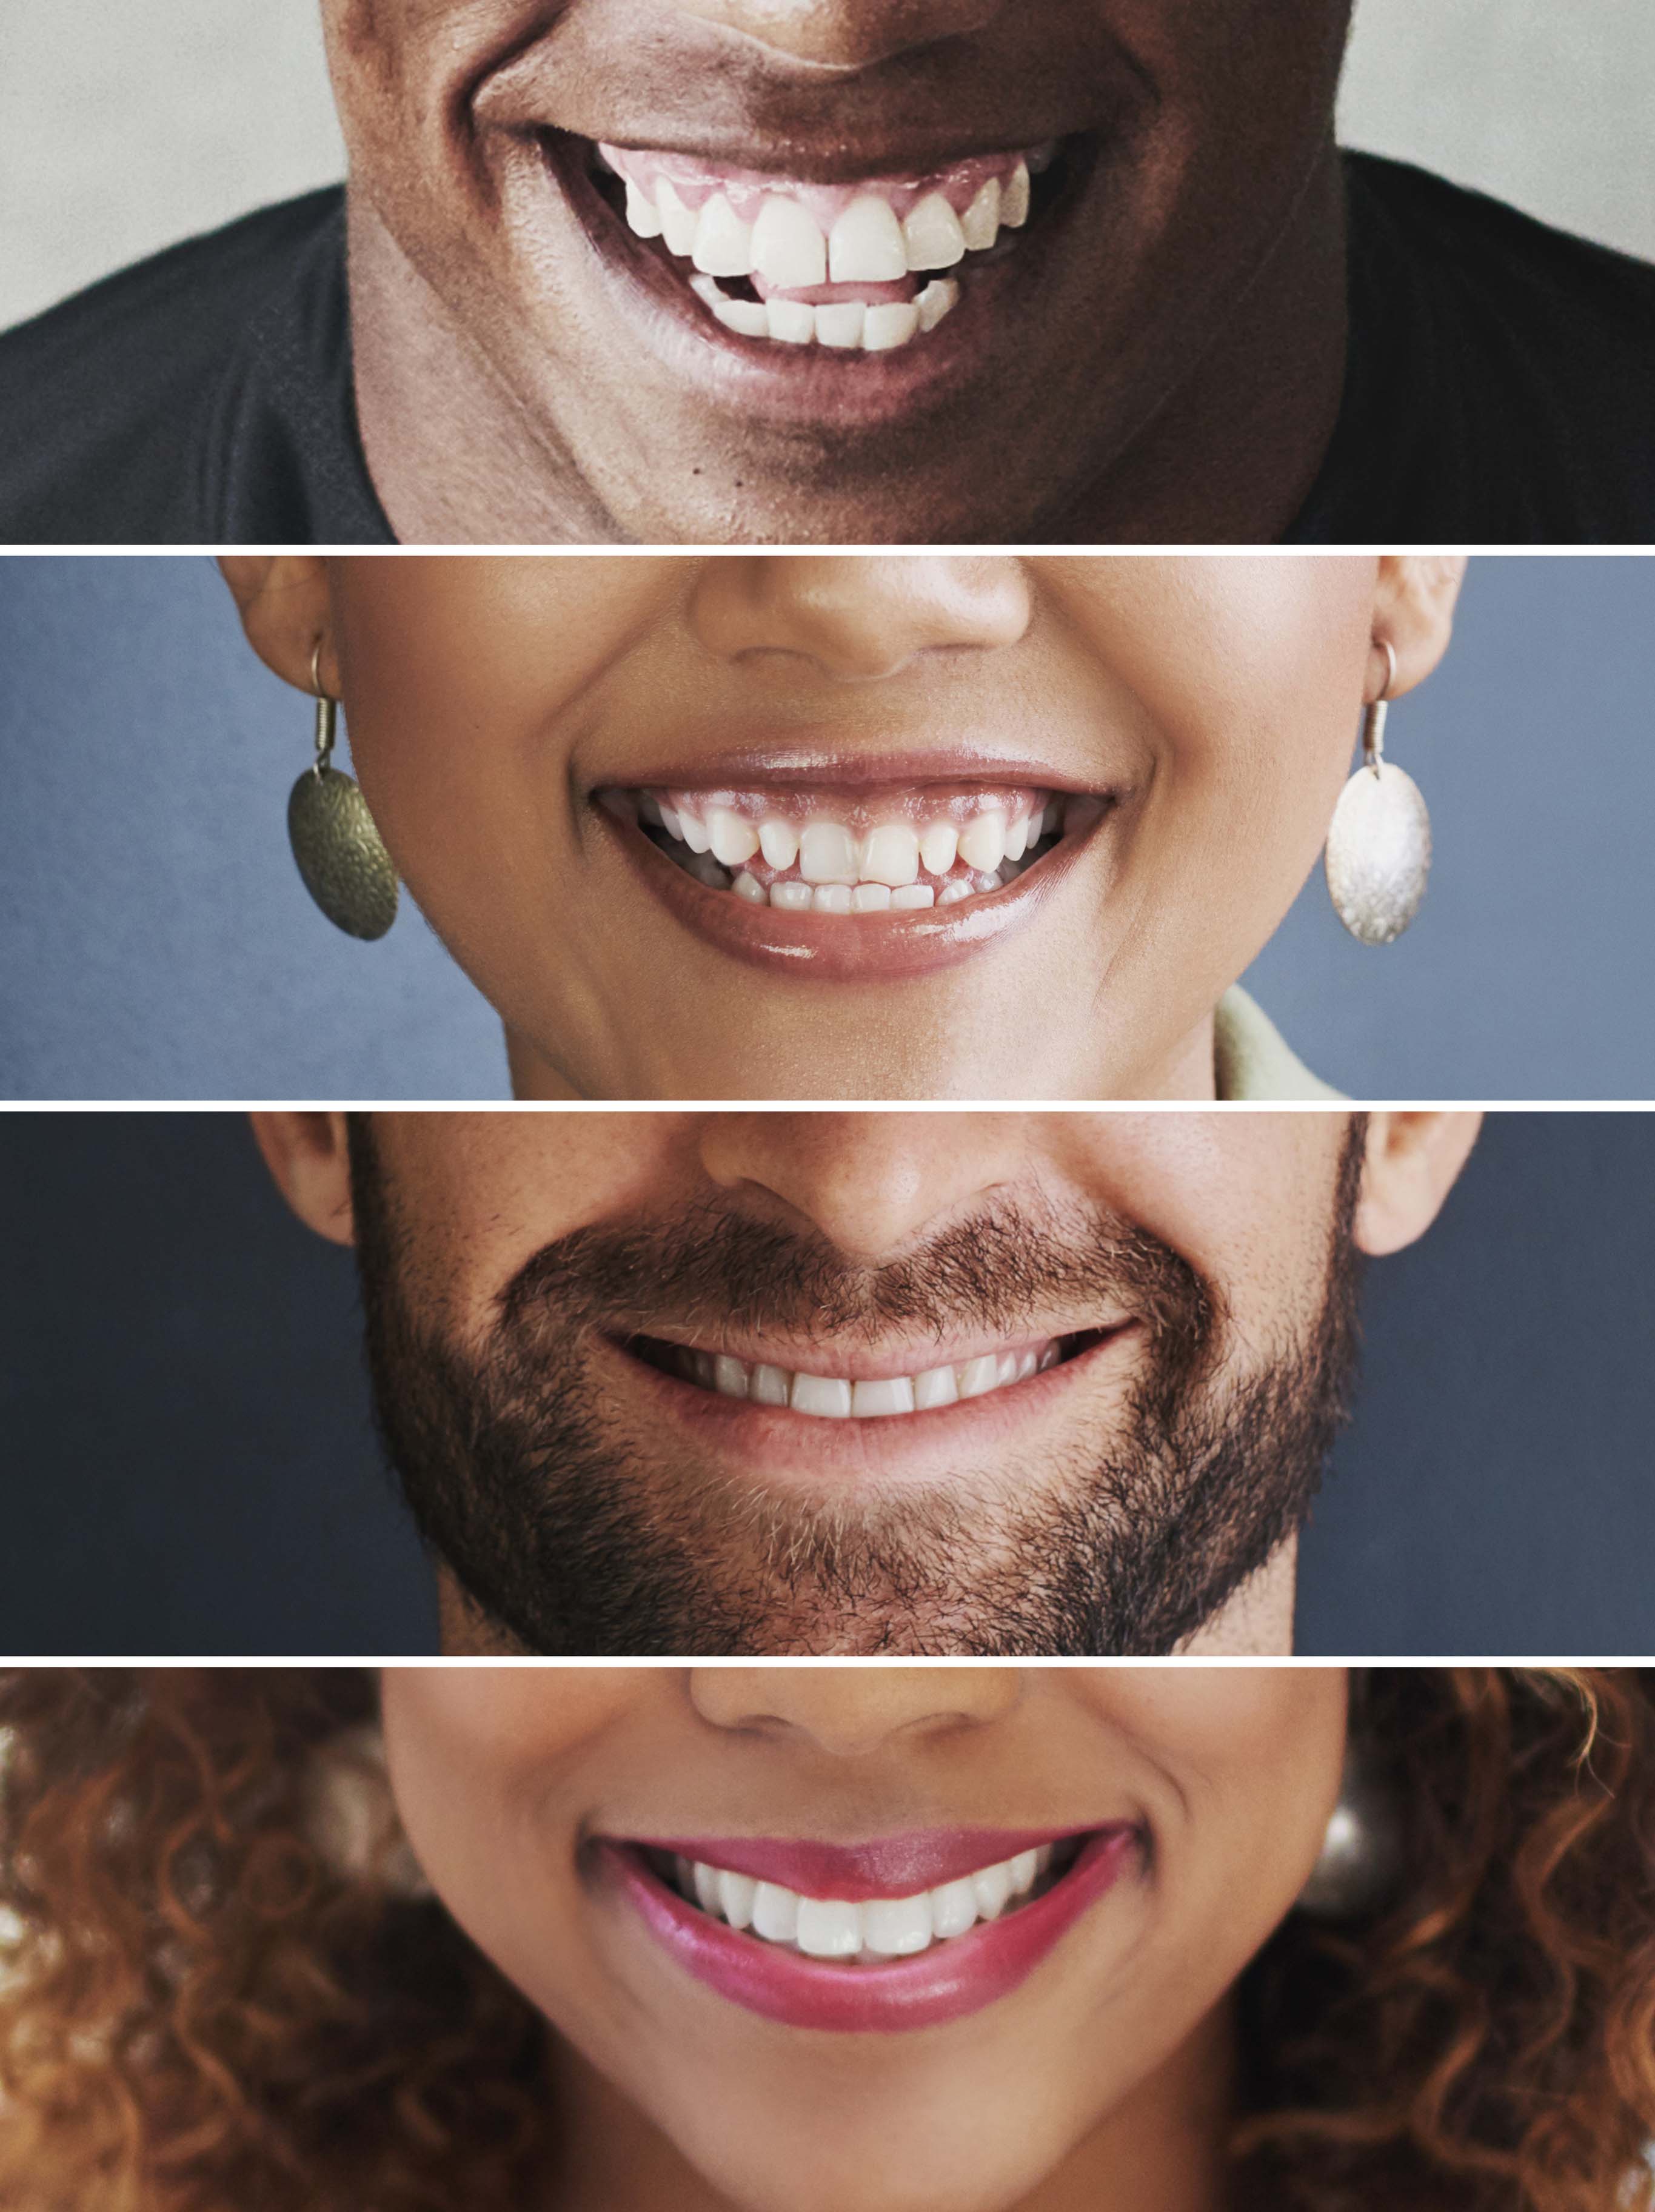 Composite image of an assortment of people smiling